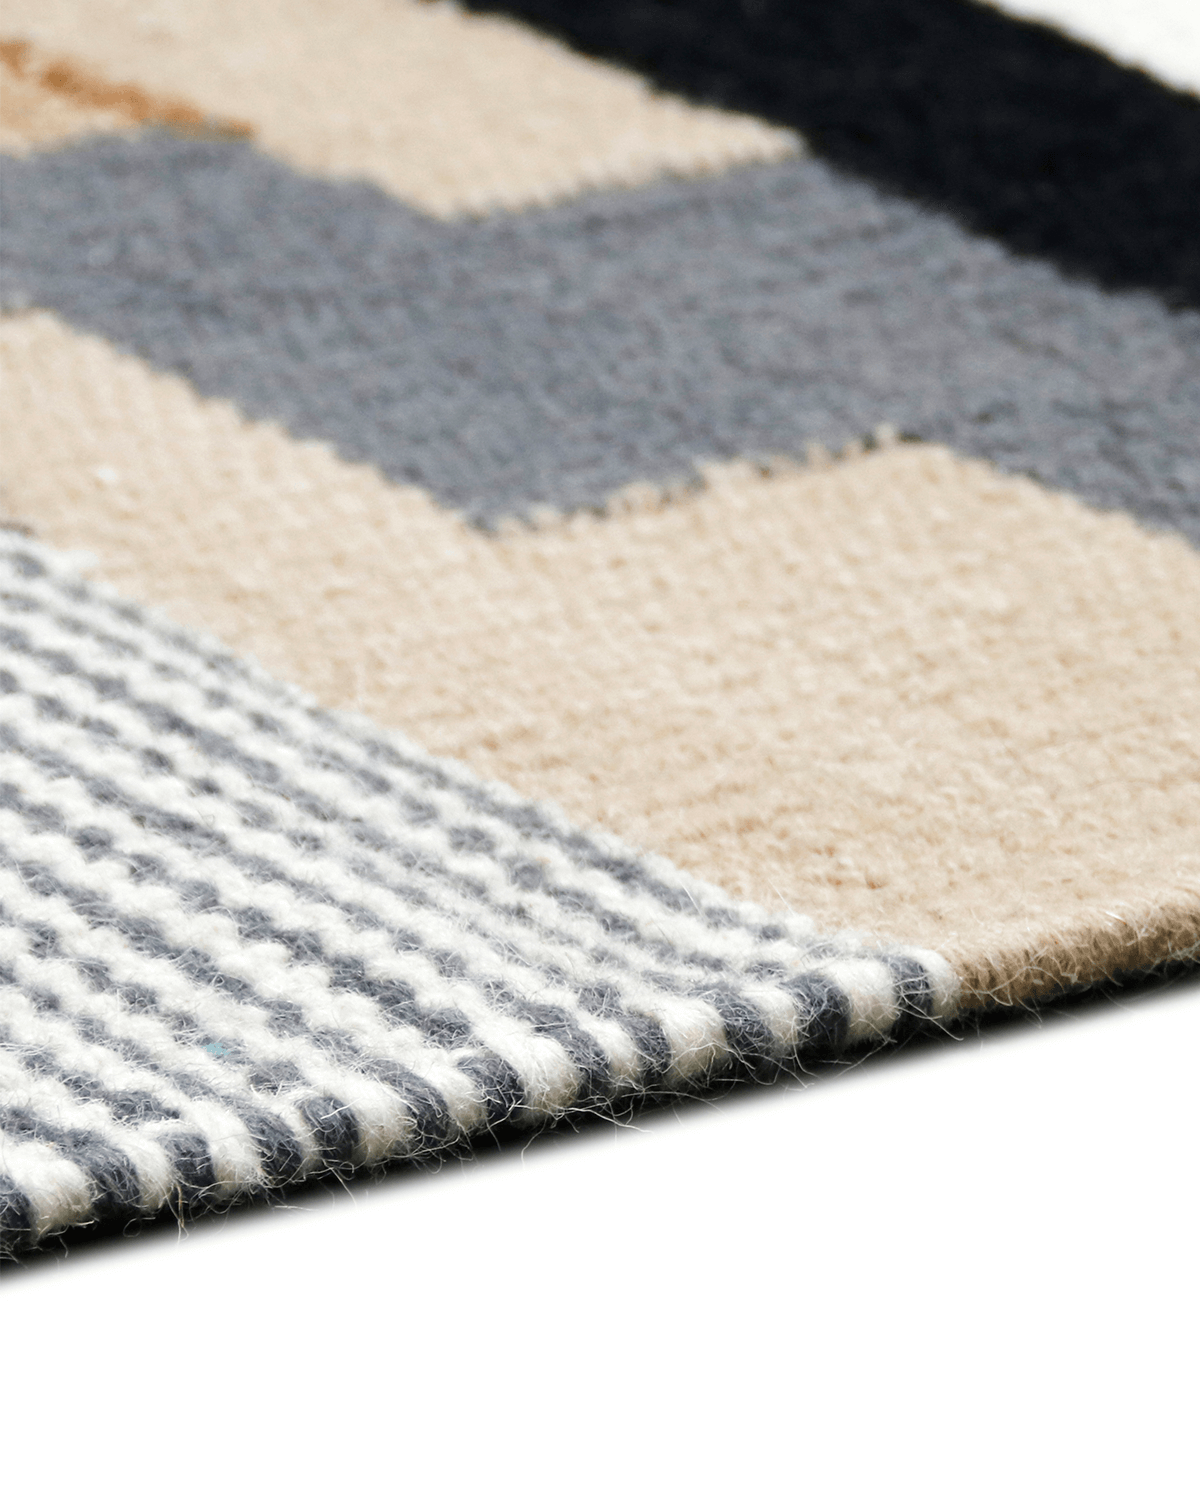 Modern Hand-crafted Rug (FR-3 STYLE WEAVE-032)